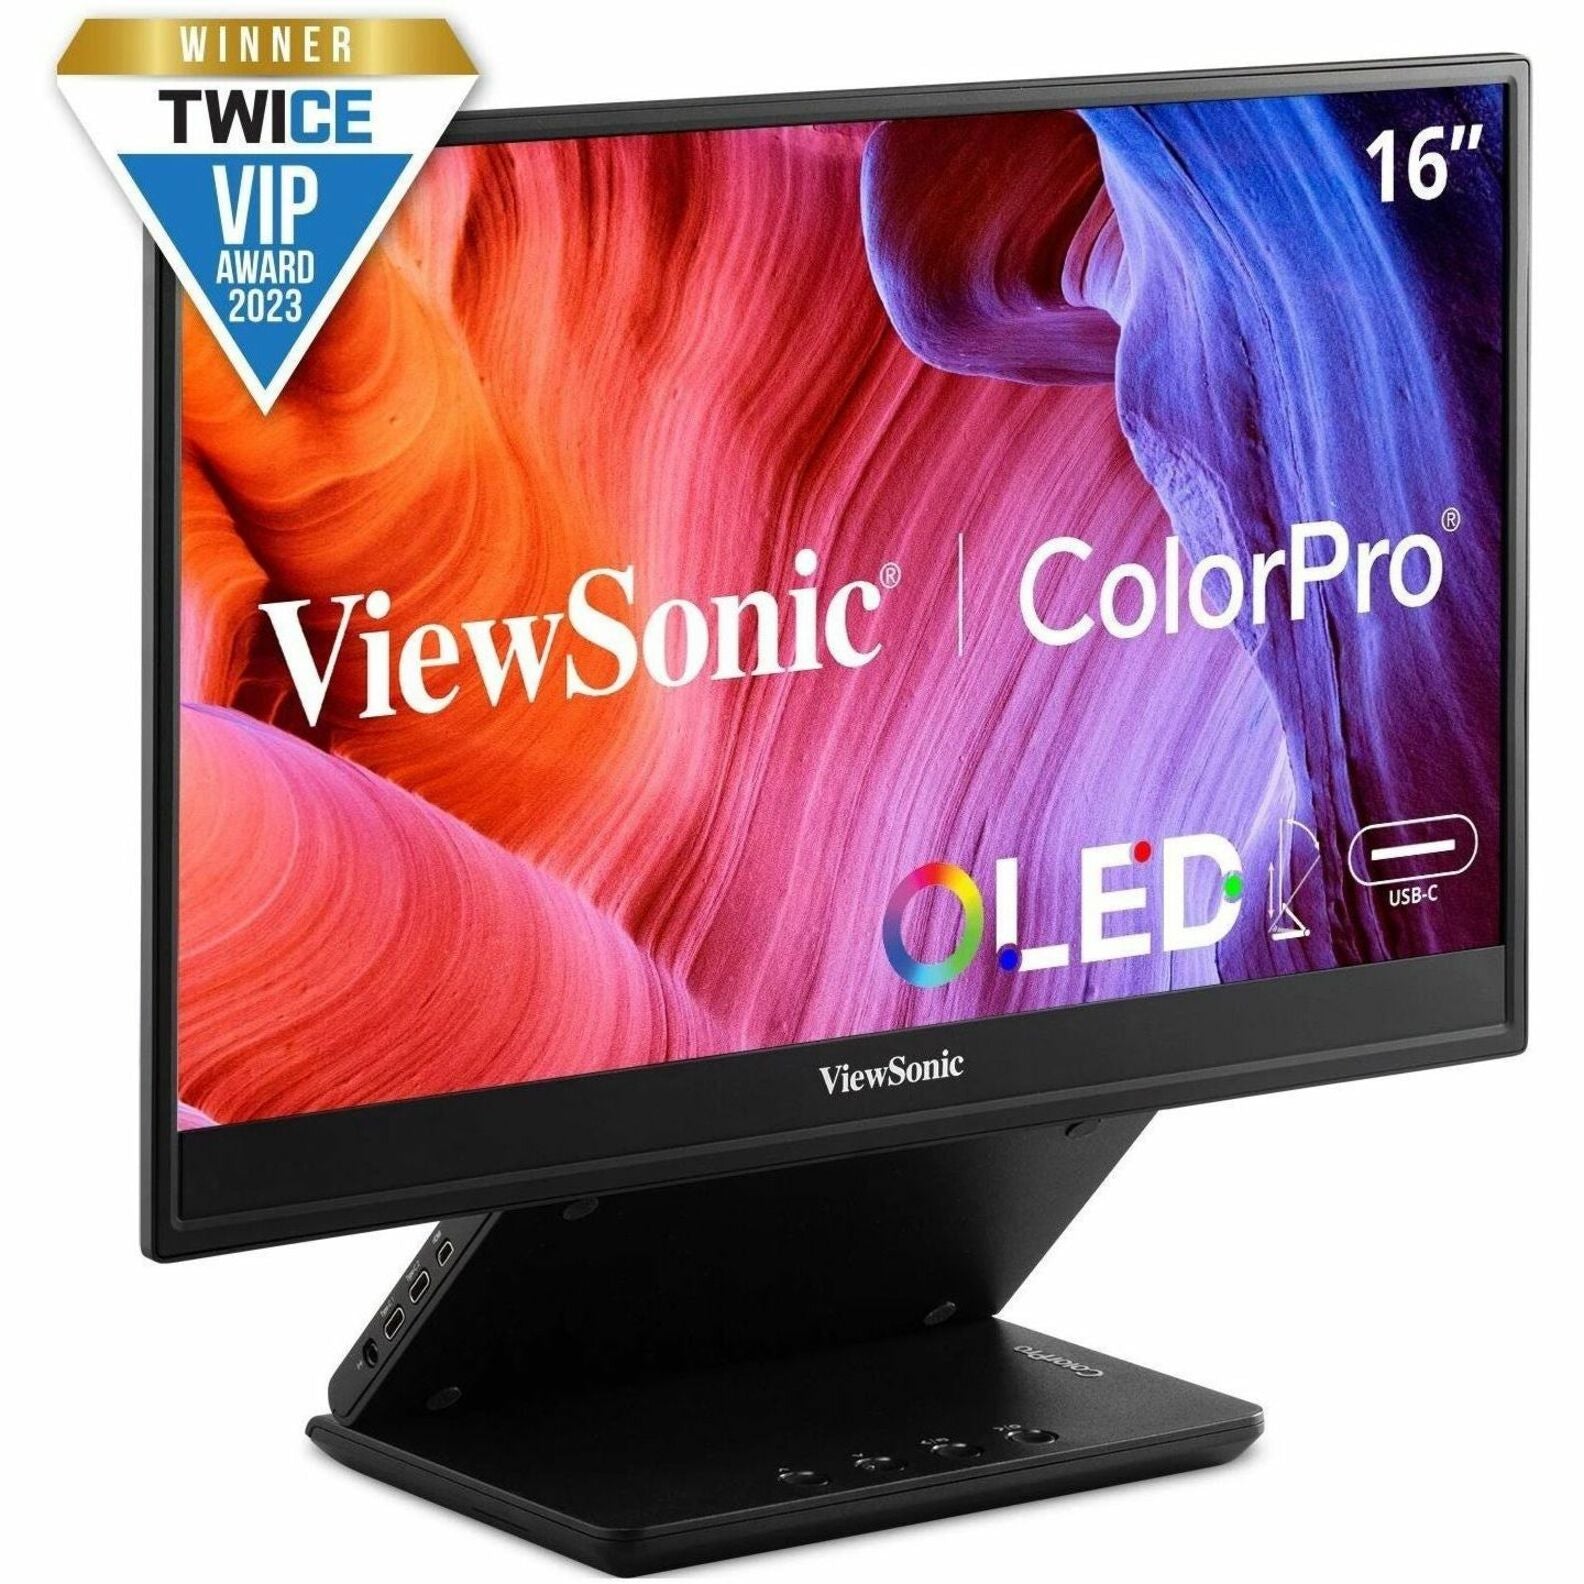 ViewSonic ColorPro VP16-OLED Widescreen OLED Monitor 15.6 Portable 1080p with 60W USB-C and mini-HDMI and Ergonomic Stand